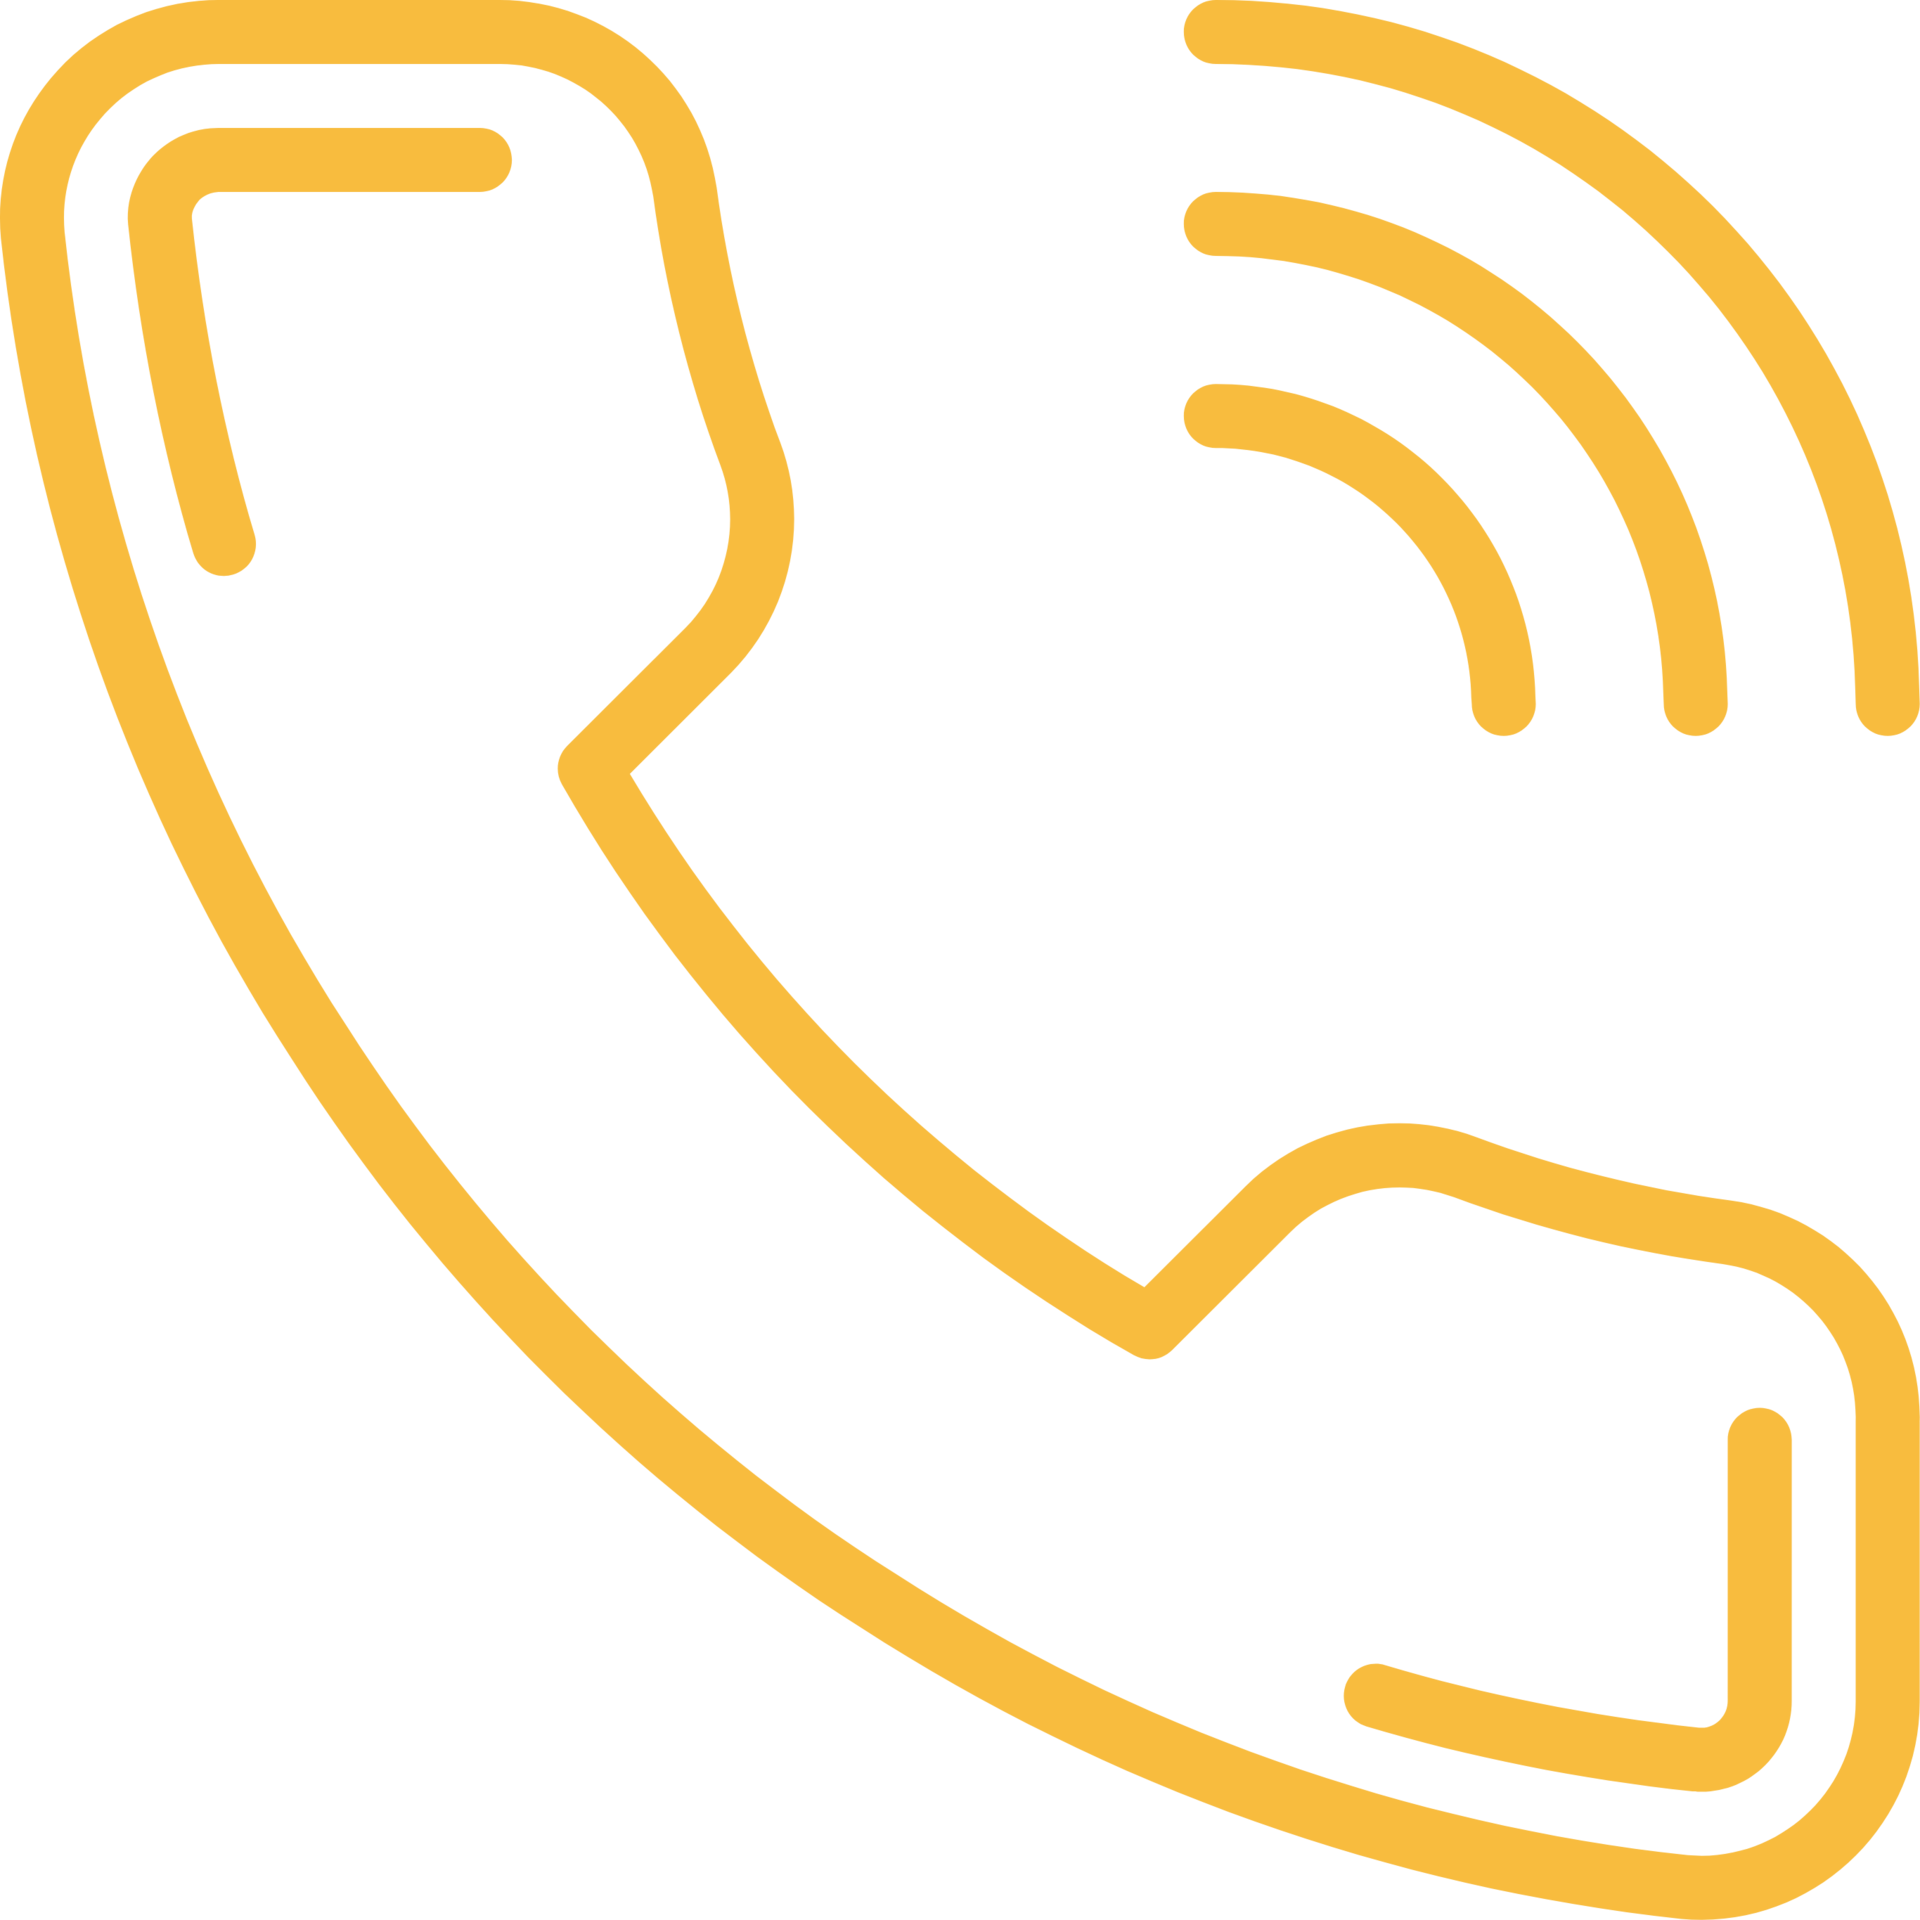 002-telephone-1.png